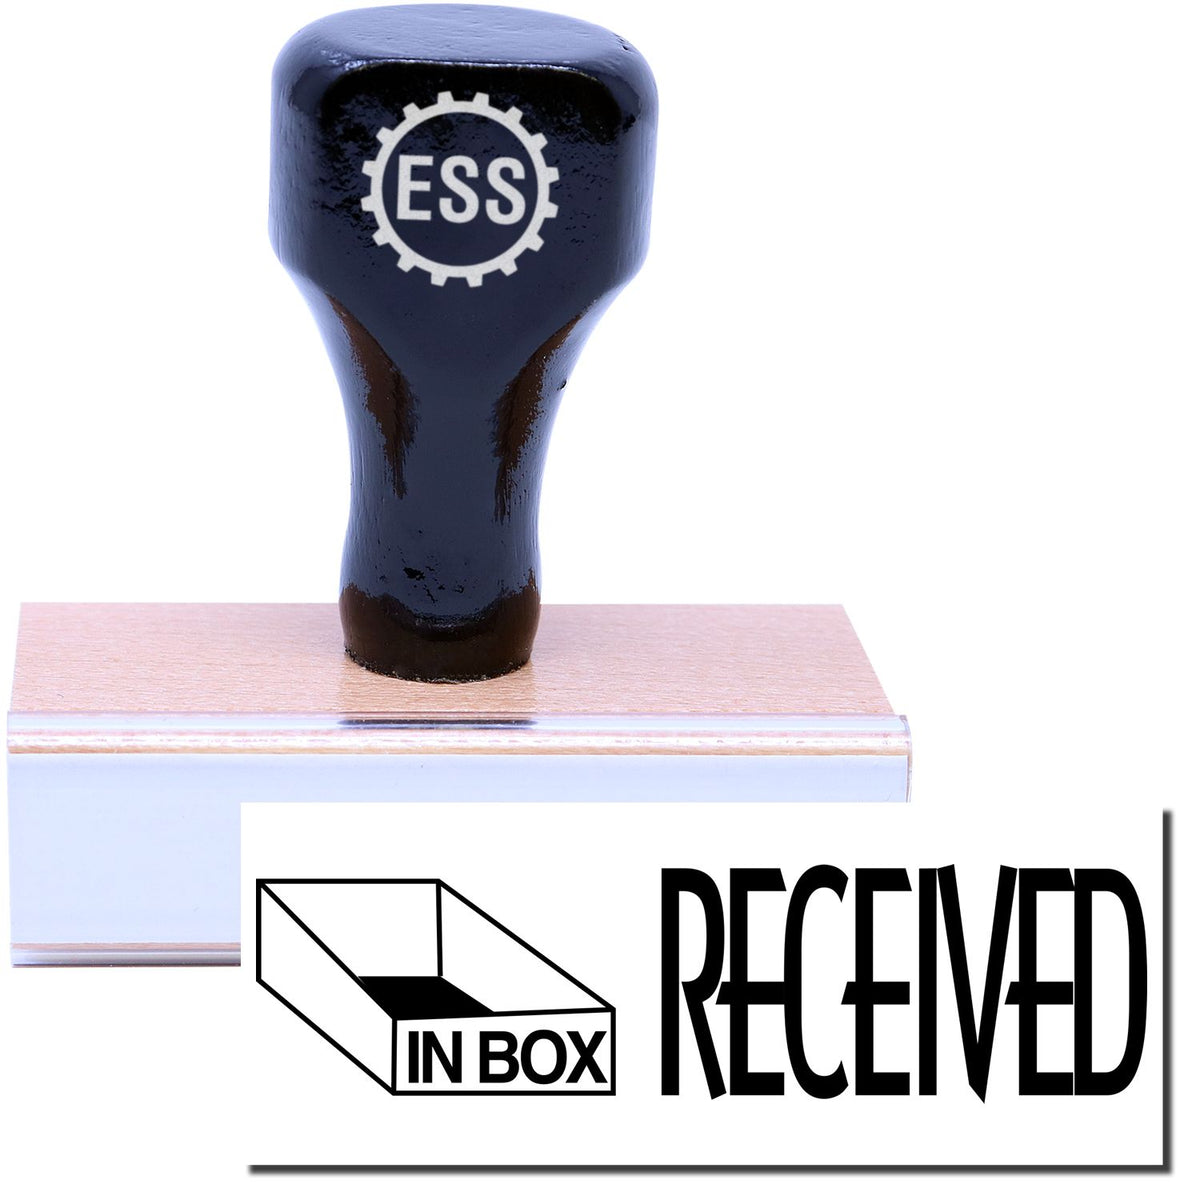 A stock office rubber stamp with a stamped image showing how the text &quot;RECEIVED&quot; in a large font with an In Box icon on the left side is displayed after stamping.